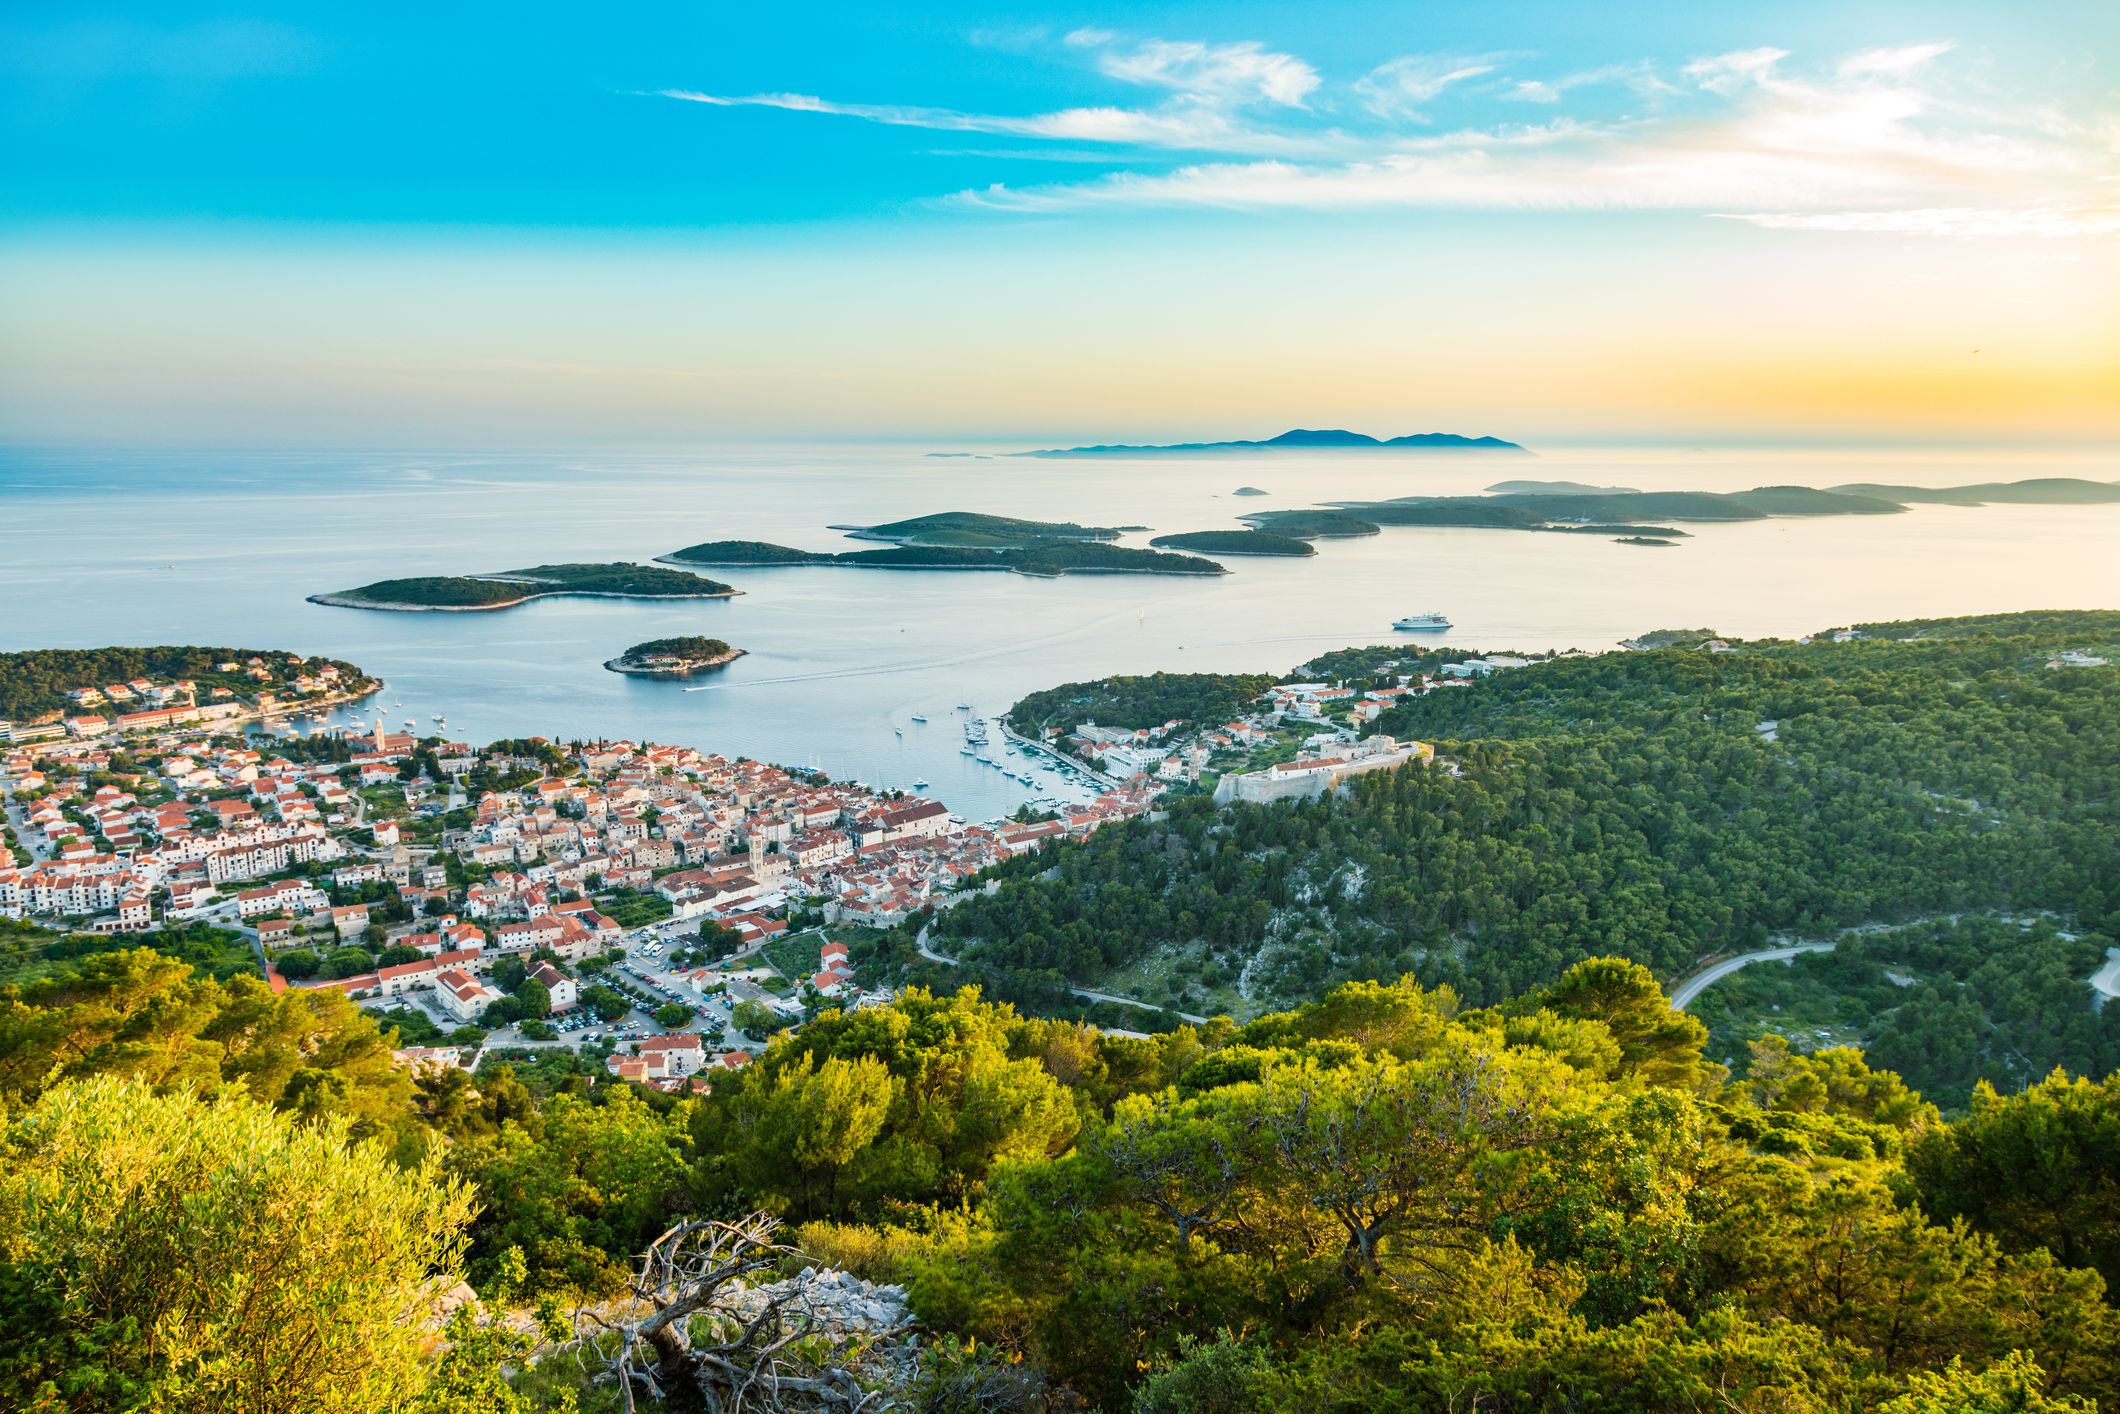 Aerial view of the town of Hvar and the Pakleni Islands